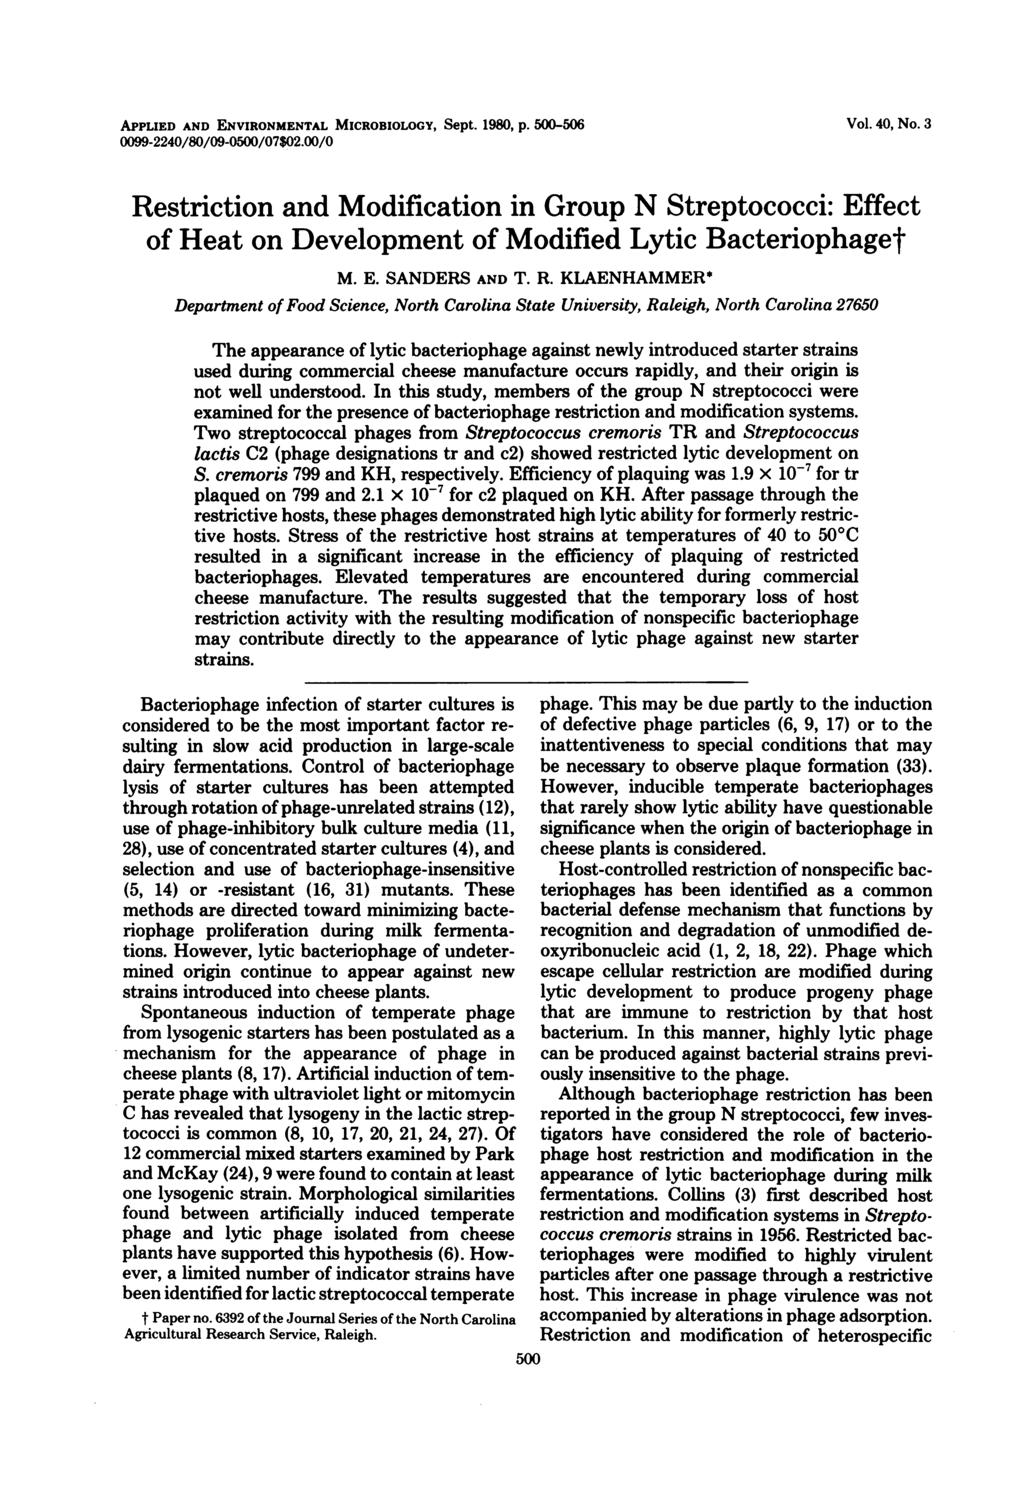 APPLIED AND ENVIRONMENTAL MICROBIOLOGY, Sept. 198, p. 5-56 99-224/8/9-5/7$2./ Vol. 4, No.